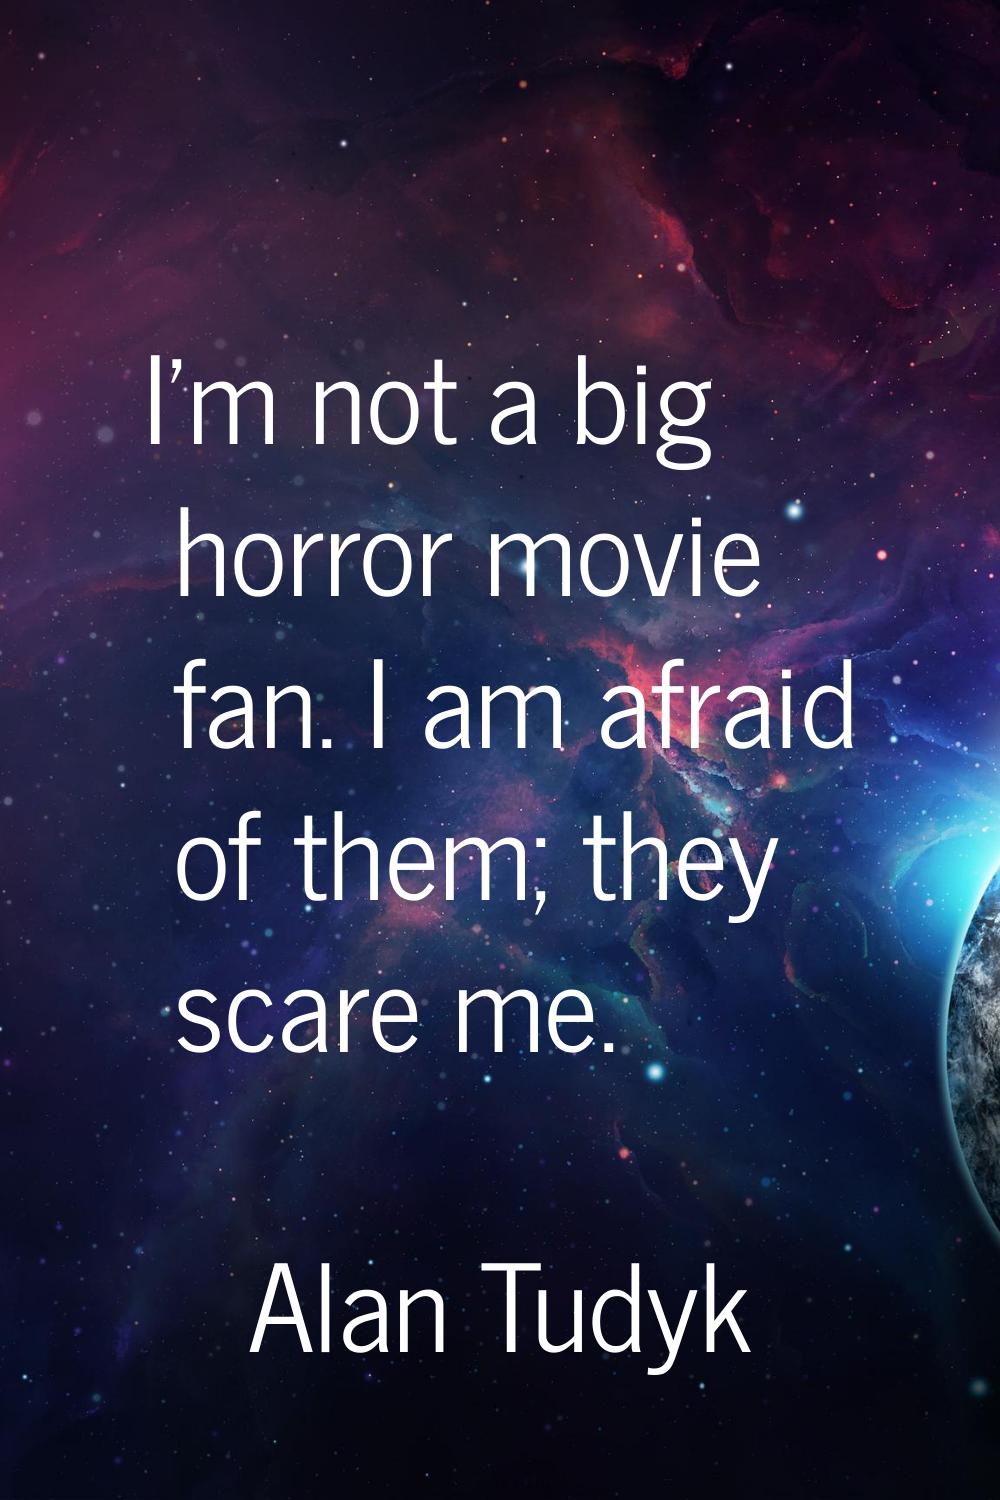 I'm not a big horror movie fan. I am afraid of them; they scare me.